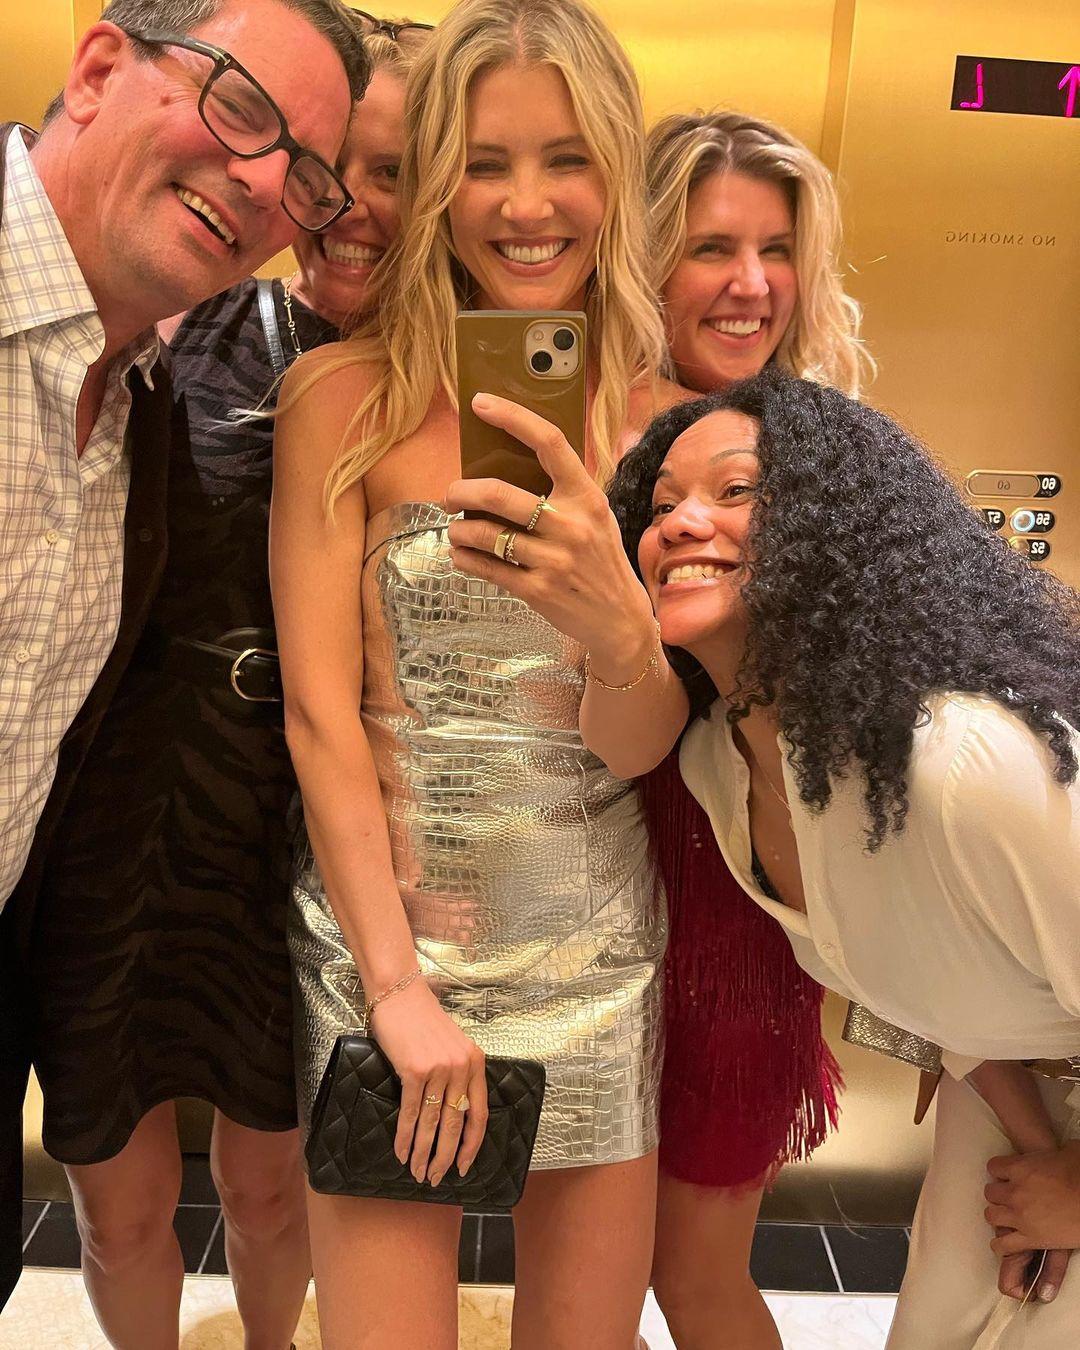 Amanda Kloots Kicks Off Being 41 'Celebrating' Life With Friends & Family In Vegas